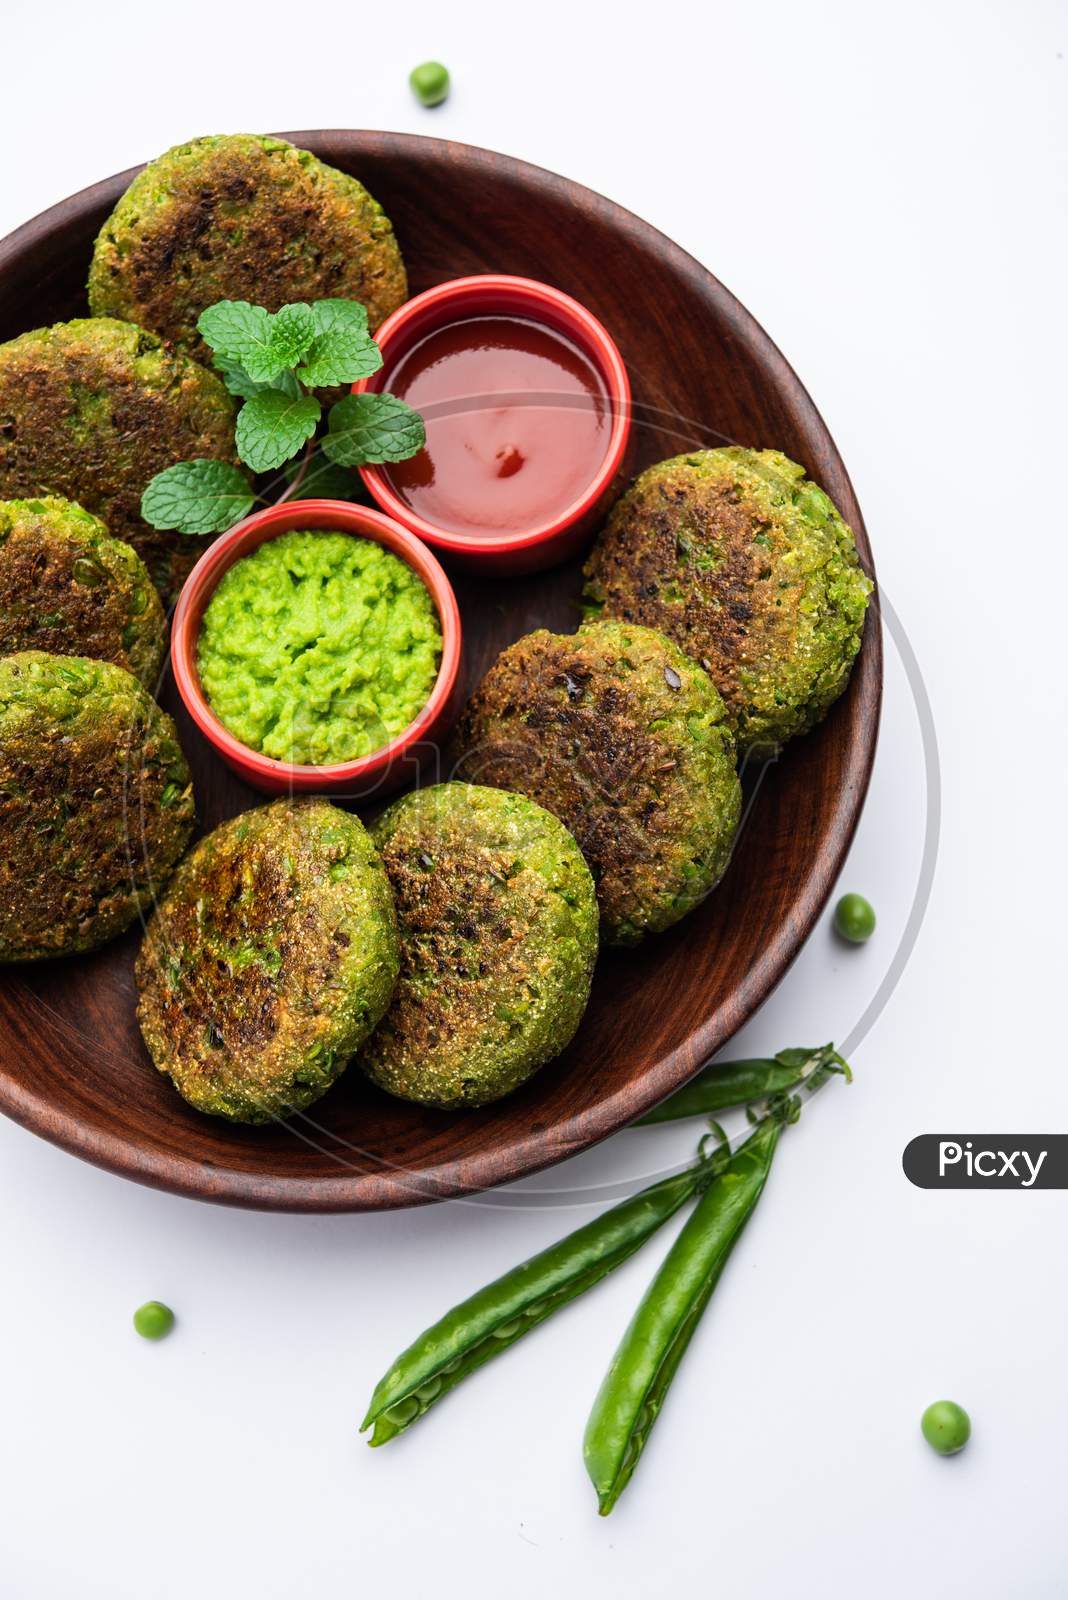 Hara Bhara Kabab Are Pan-Fried Spiced Patties Made With A Mix Of Spinach, Green Peas And Potatoes